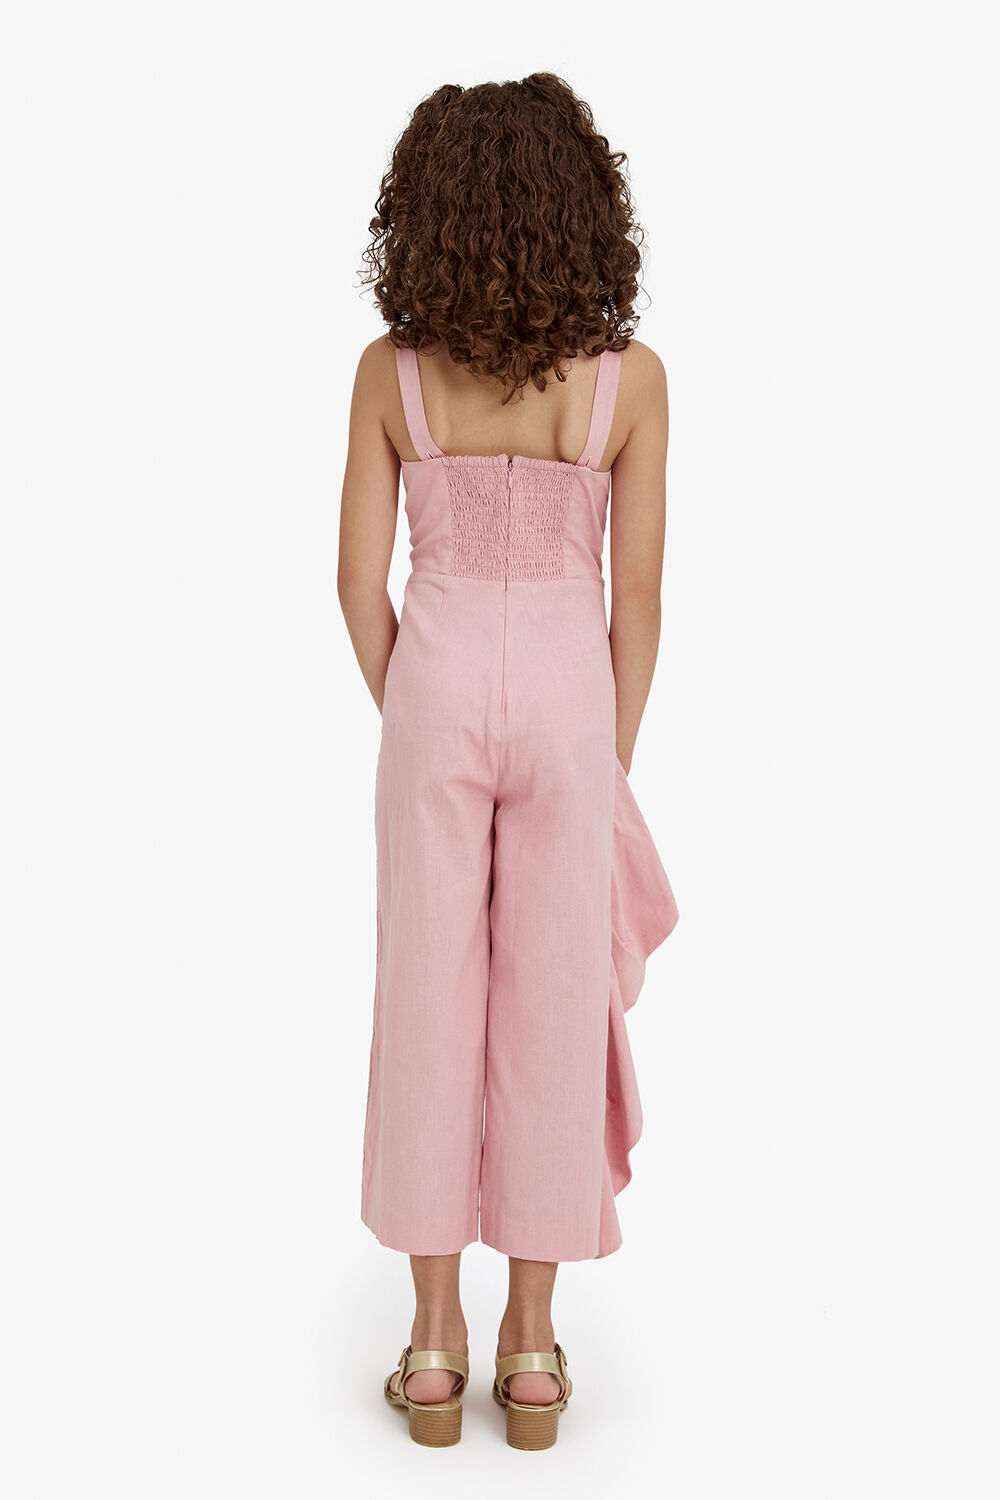 NELLY JUMPSUIT in colour RASPBERRY SORBET